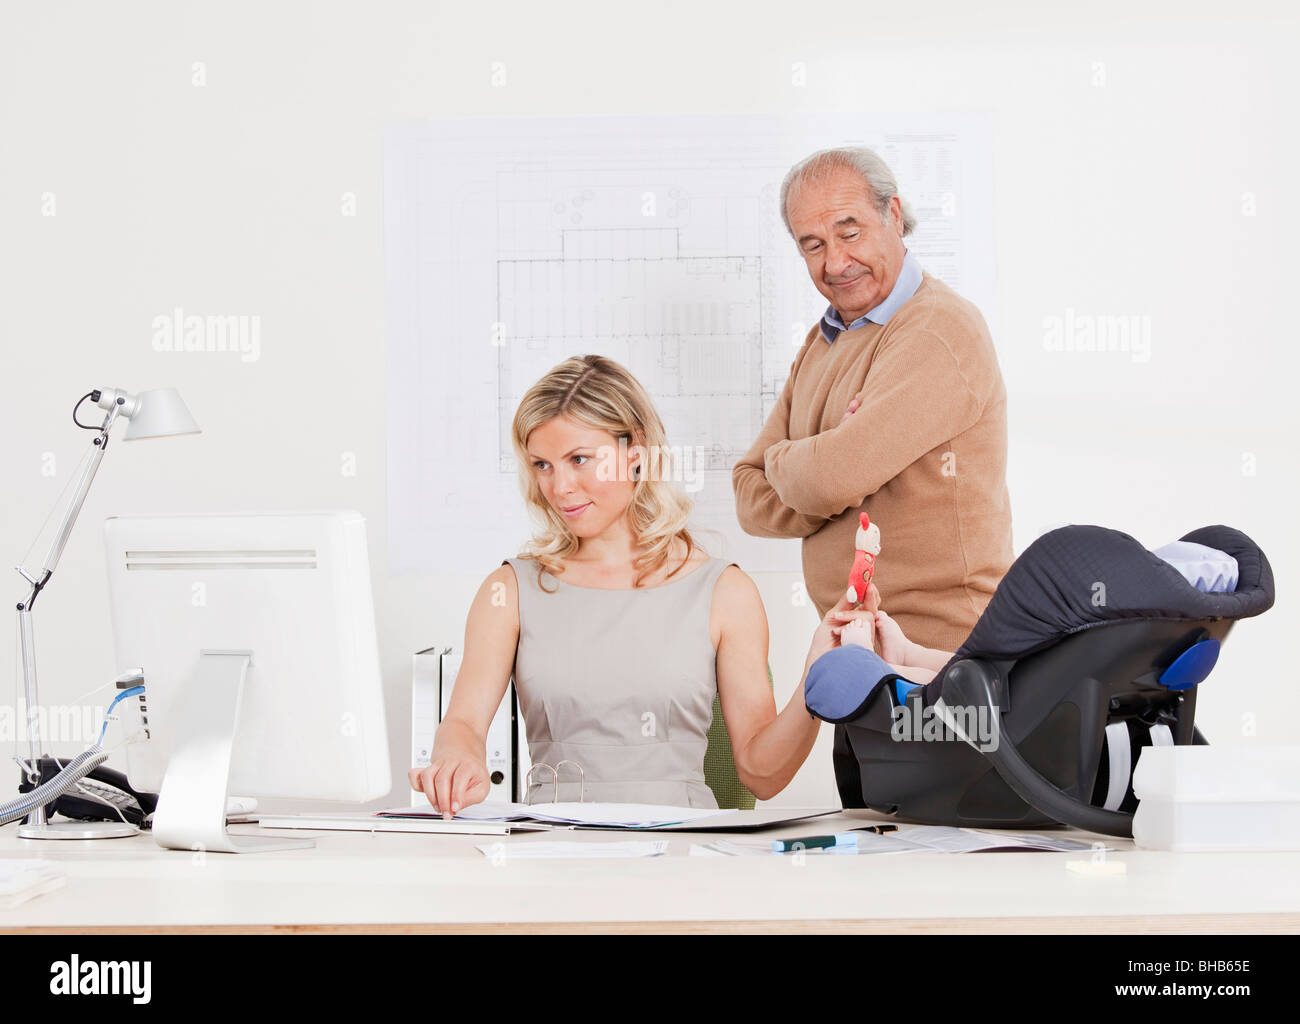 Woman with baby, boss watching her. Stock Photo